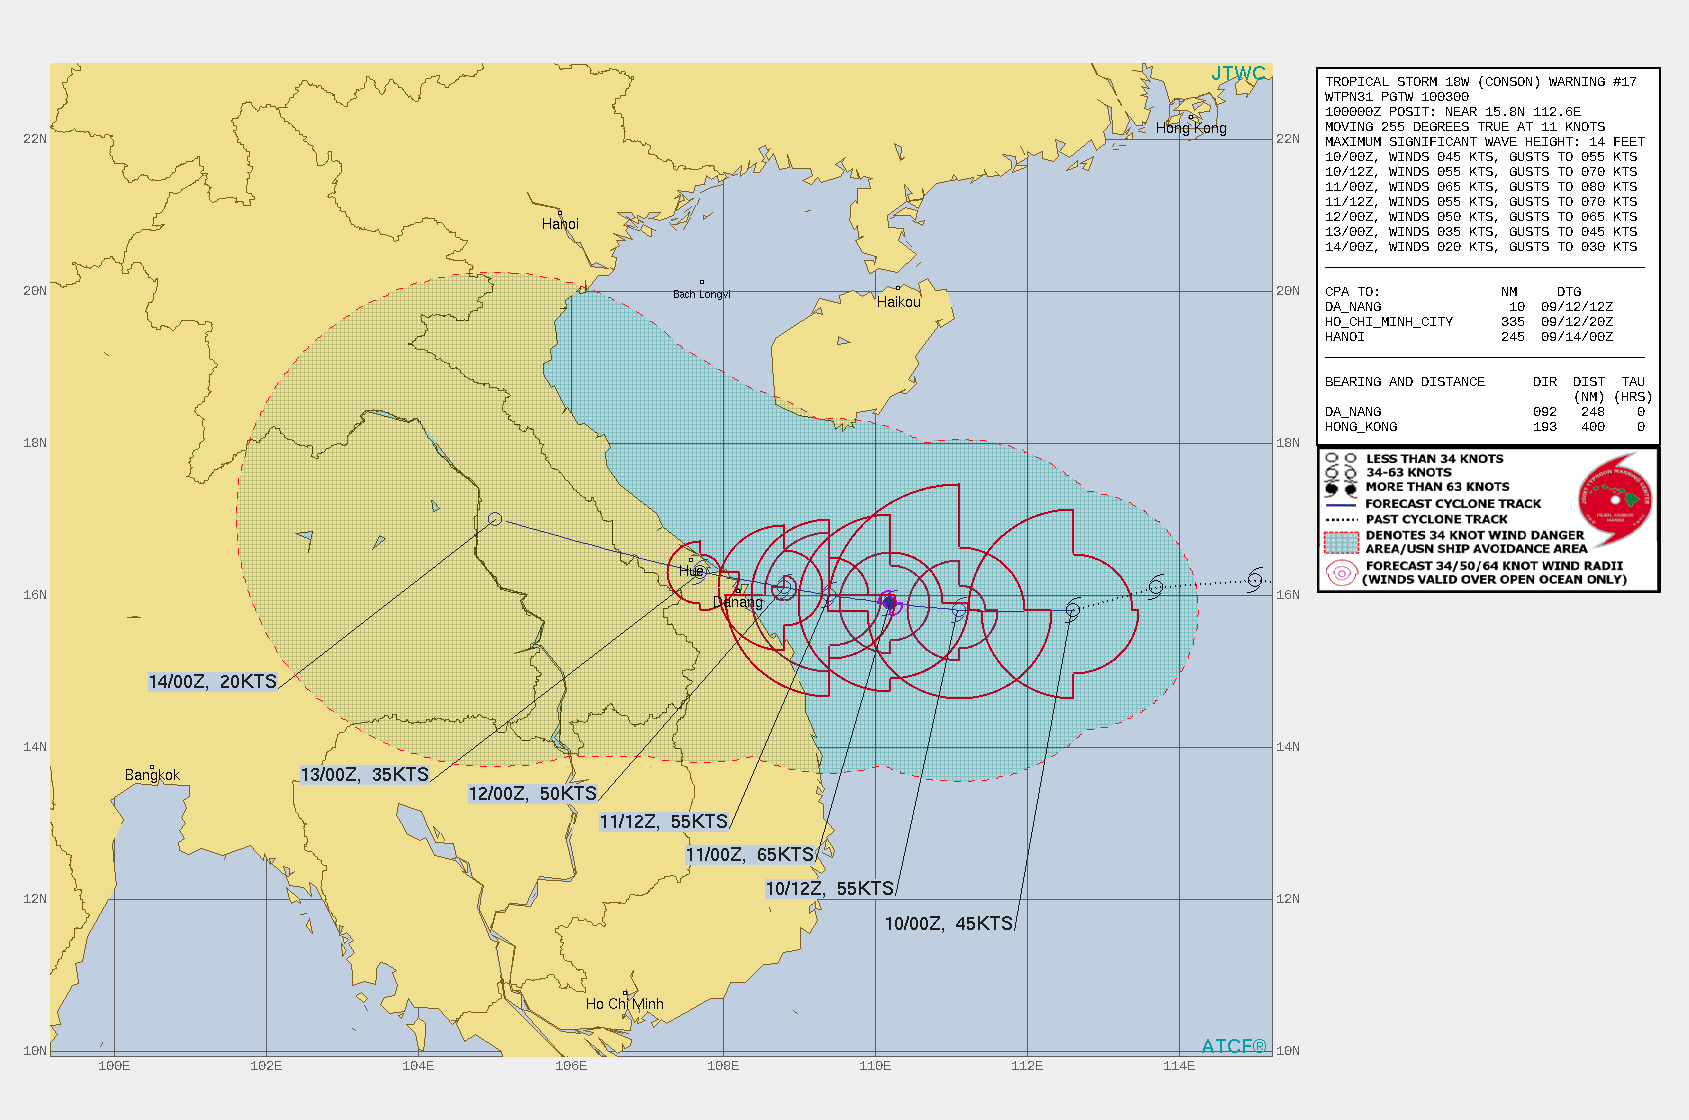 TS 18W(CONSON). WARNING 18 ISSUED AT 10/03UTC.SIGNIFICANT FORECAST CHANGES: THERE ARE NO SIGNIFICANT CHANGES TO THE FORECAST FROM THE PREVIOUS WARNING.  FORECAST DISCUSSION: TS CONSON WILL GENERALLY TRACK WESTWARD UNDER THE SUBTROPICAL RIDGE(STR) TOWARD CENTRAL VIETNAM AND MAKE LANDFALL JUST BEFORE 72H NEAR DANANG. AFTERWARD, IT WILL TURN MORE WEST-NORTHWESTWARD AS THE STR IS WEAKENED BY A MIDLATITUDE TROUGH. THE MARGINALLY FAVORABLE ENVIRONMENT WILL FUEL A SLOW INTENSIFICATION TO A PEAK OF 65KNOTS/CAT 1 BY 24H; AFTERWARD, INCREASING VERTICAL WIND SHEAR WILL GRADUALLY WEAKEN IT DOWN TO 35KNOTS BY LANDFALL. CONCURRENTLY, INTERACTION WITH THE SOUTHWESTERLY MONSOON IN THE GULF OF TONKIN WILL MAINTAIN THE WESTWARD TRACK, EFFECTIVELY DELAYING THE WEST-NORTHWESTWARD TRACK UNTIL AFTER LANDFALL. TS 18W WILL DISSIPATE DUE TO FRICTIONAL EFFECTS OVER LAND BY 96H.